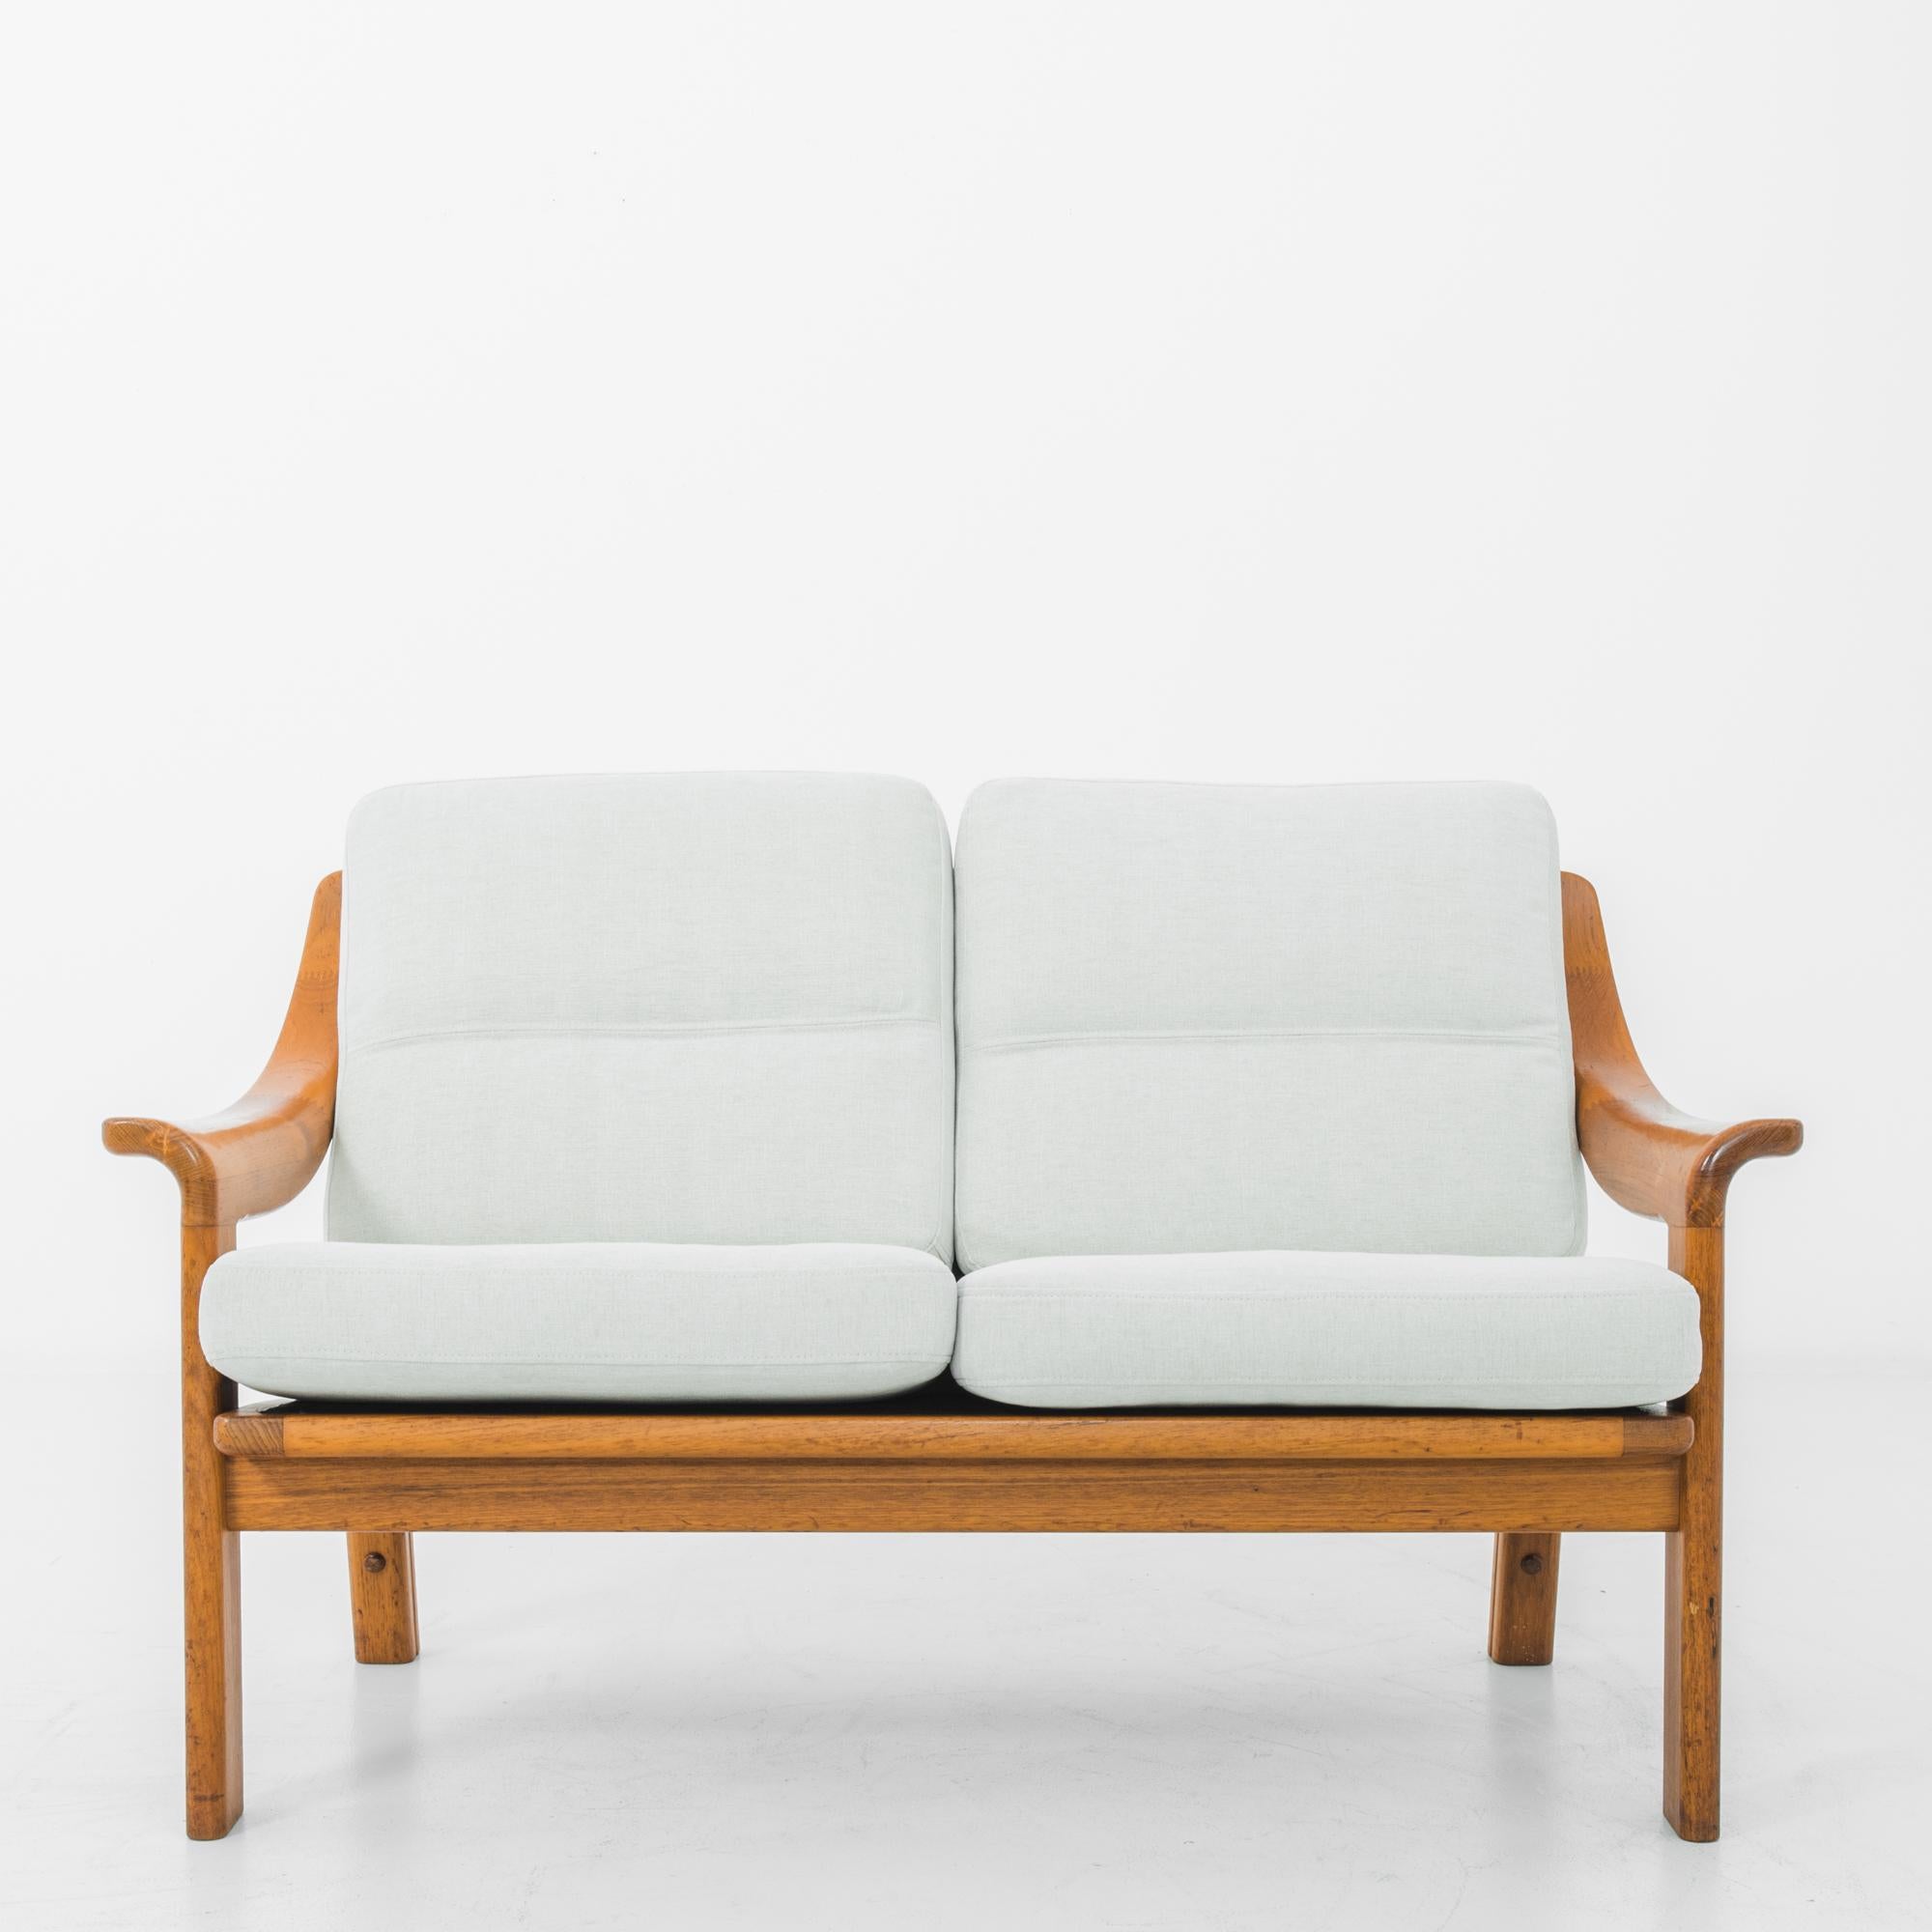 This two-seat teak sofa was made in Denmark, circa 1970. Rounded edges and the sleek curves of the armrests reflect the simple elegance of Danish Modern design. The newly upholstered seat and back feature an eggshell tint, complementing the golden